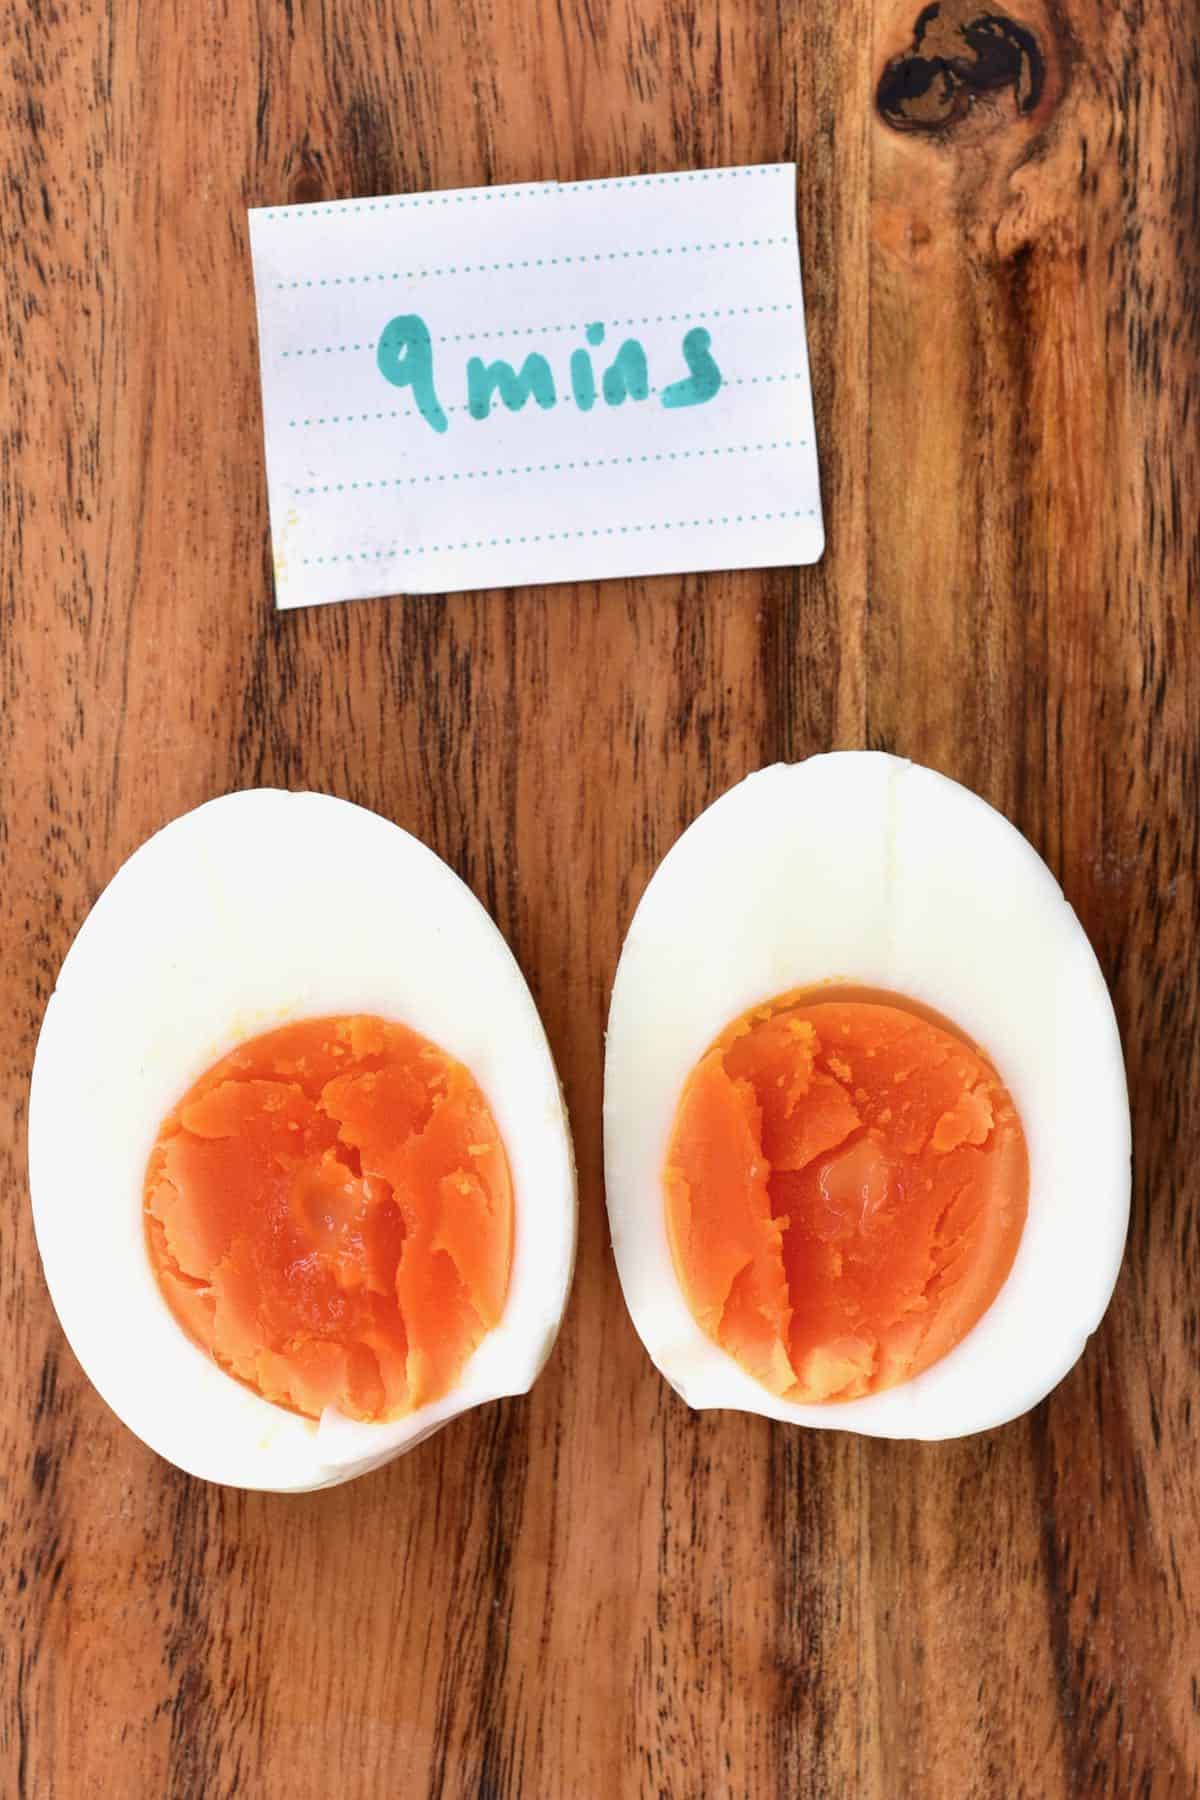 Egg boiled for 9 minutes cut in two